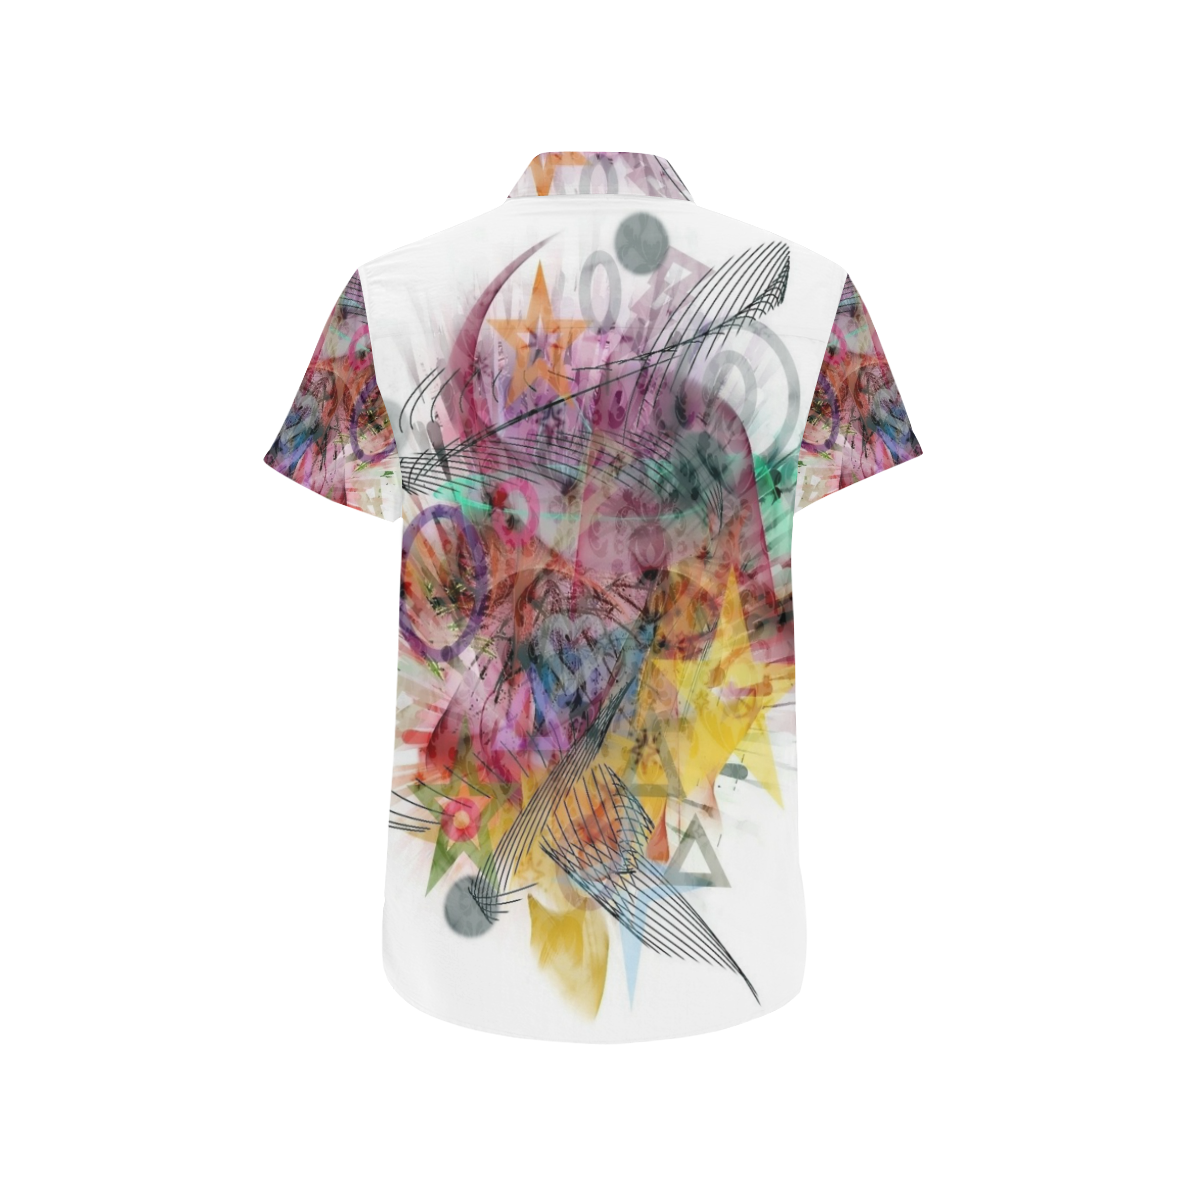 Colors of the wind by Nico Bielow Men's All Over Print Short Sleeve Shirt (Model T53)